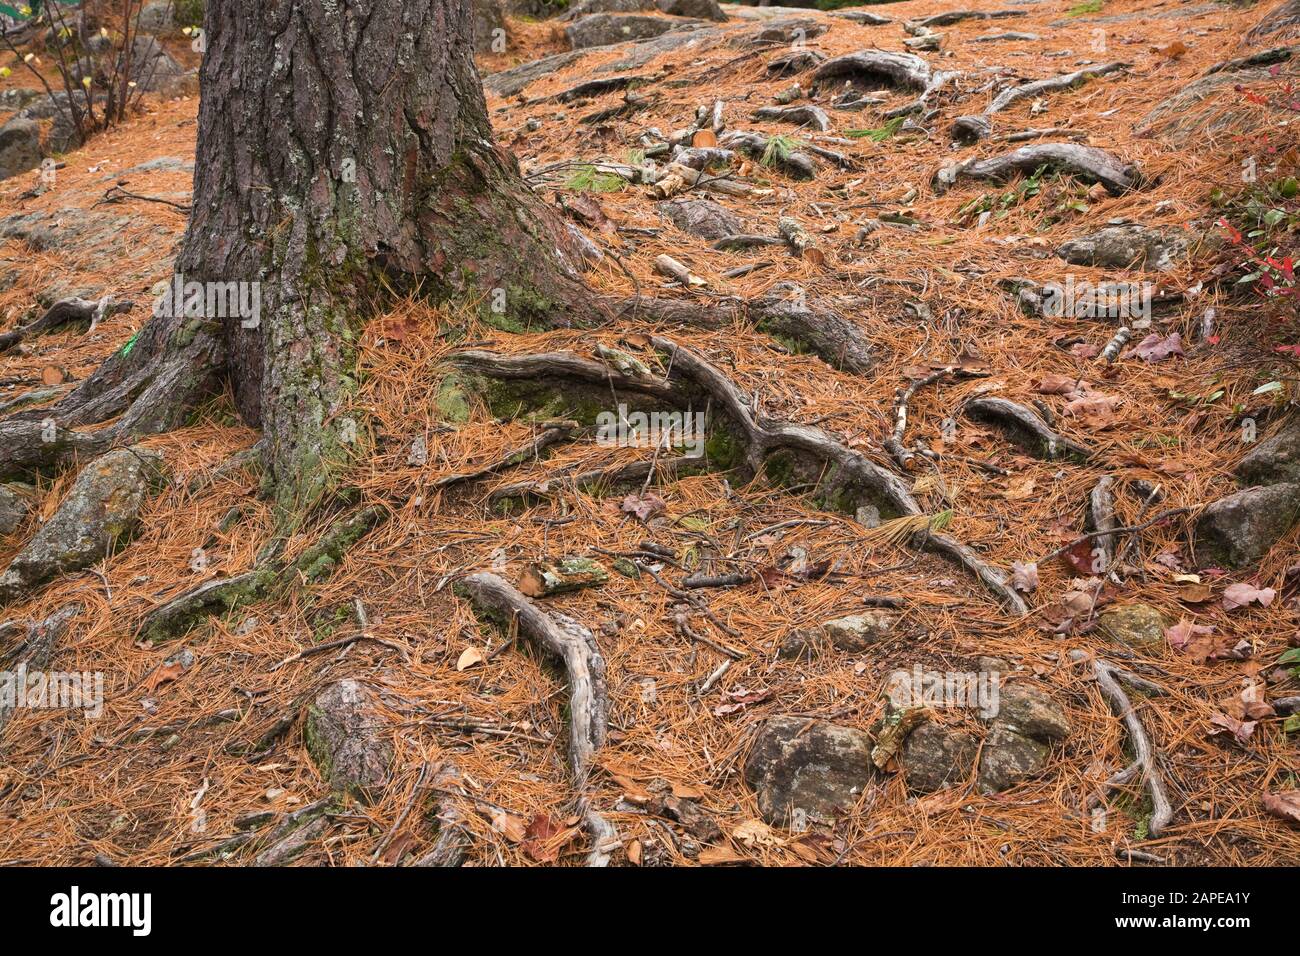 Pinus resinosa - Pine tree trunk covered with green Bryophyta - Moss, fallen pine needles with exposed roots caused by soil erosion in autumn Stock Photo